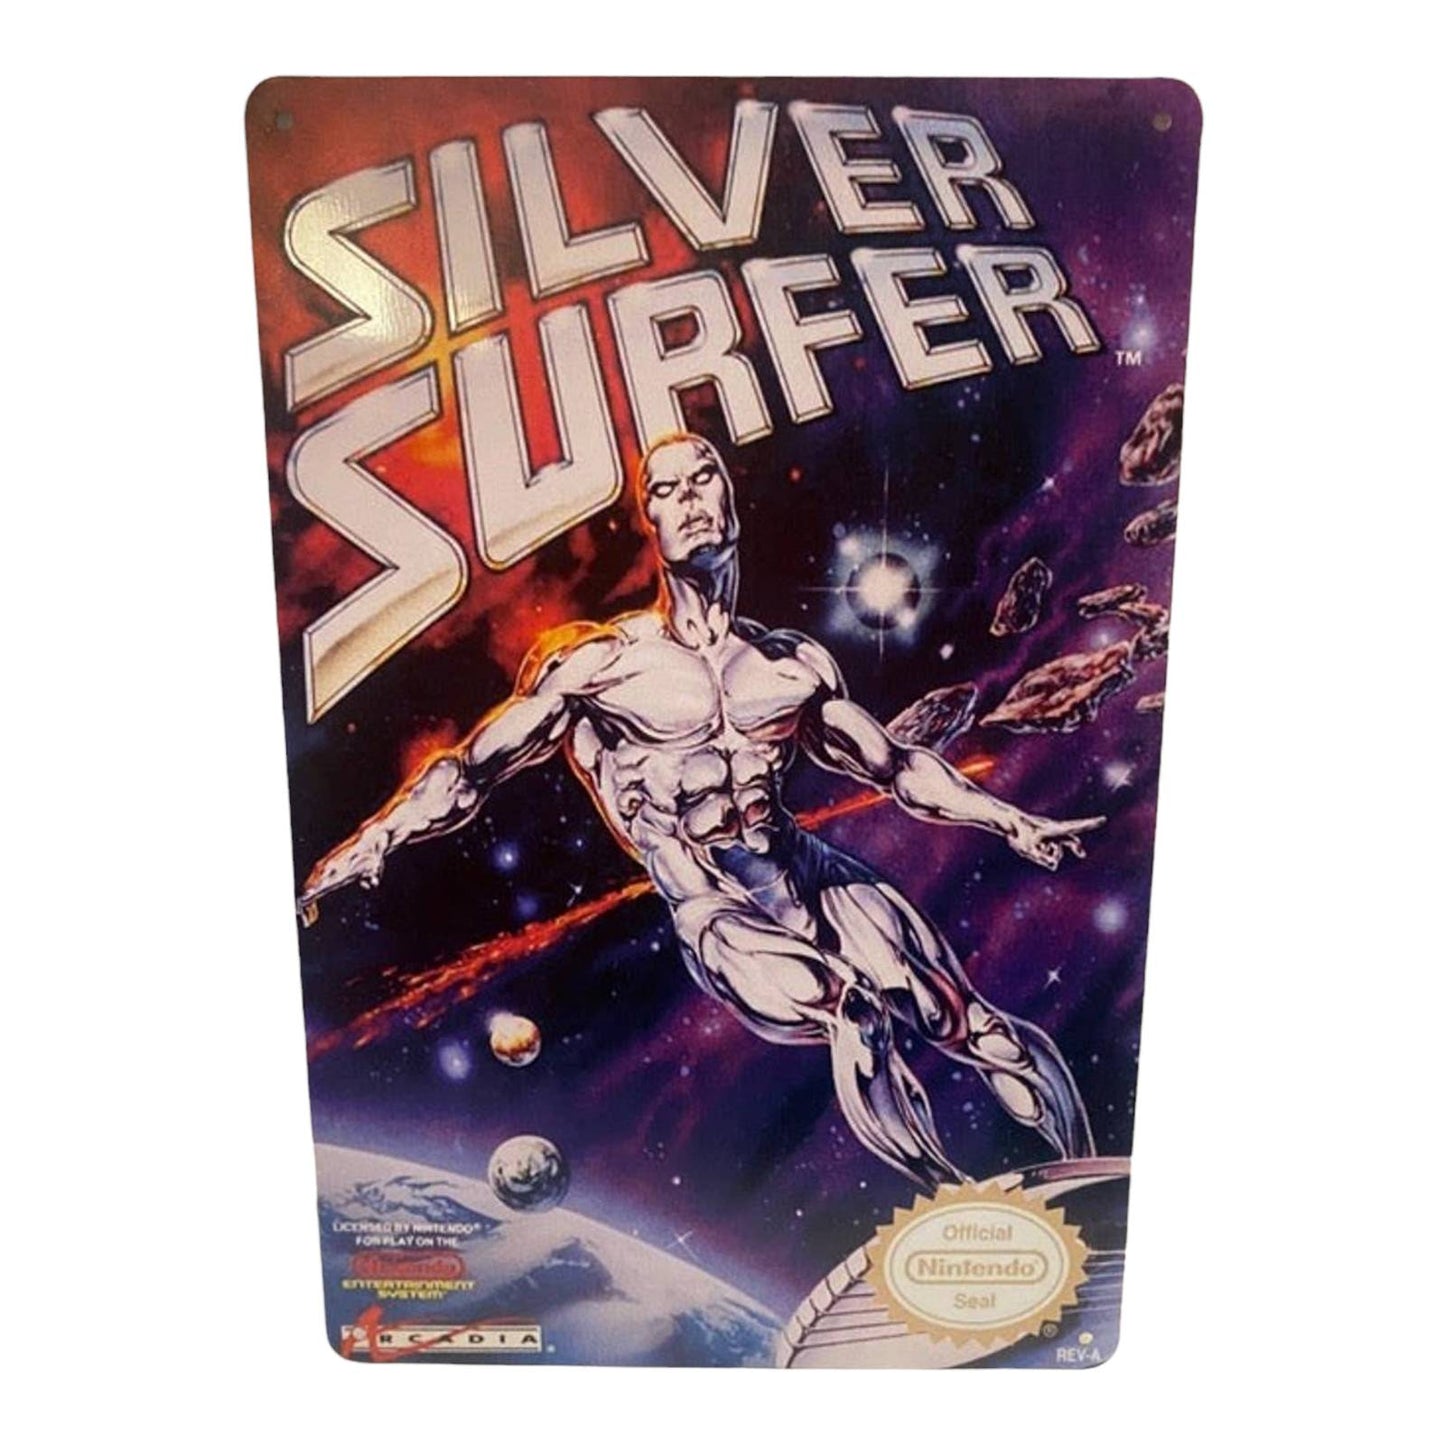 Silver Surfer Nintendo Video Game Cover Metal Tin Sign 8"x12"